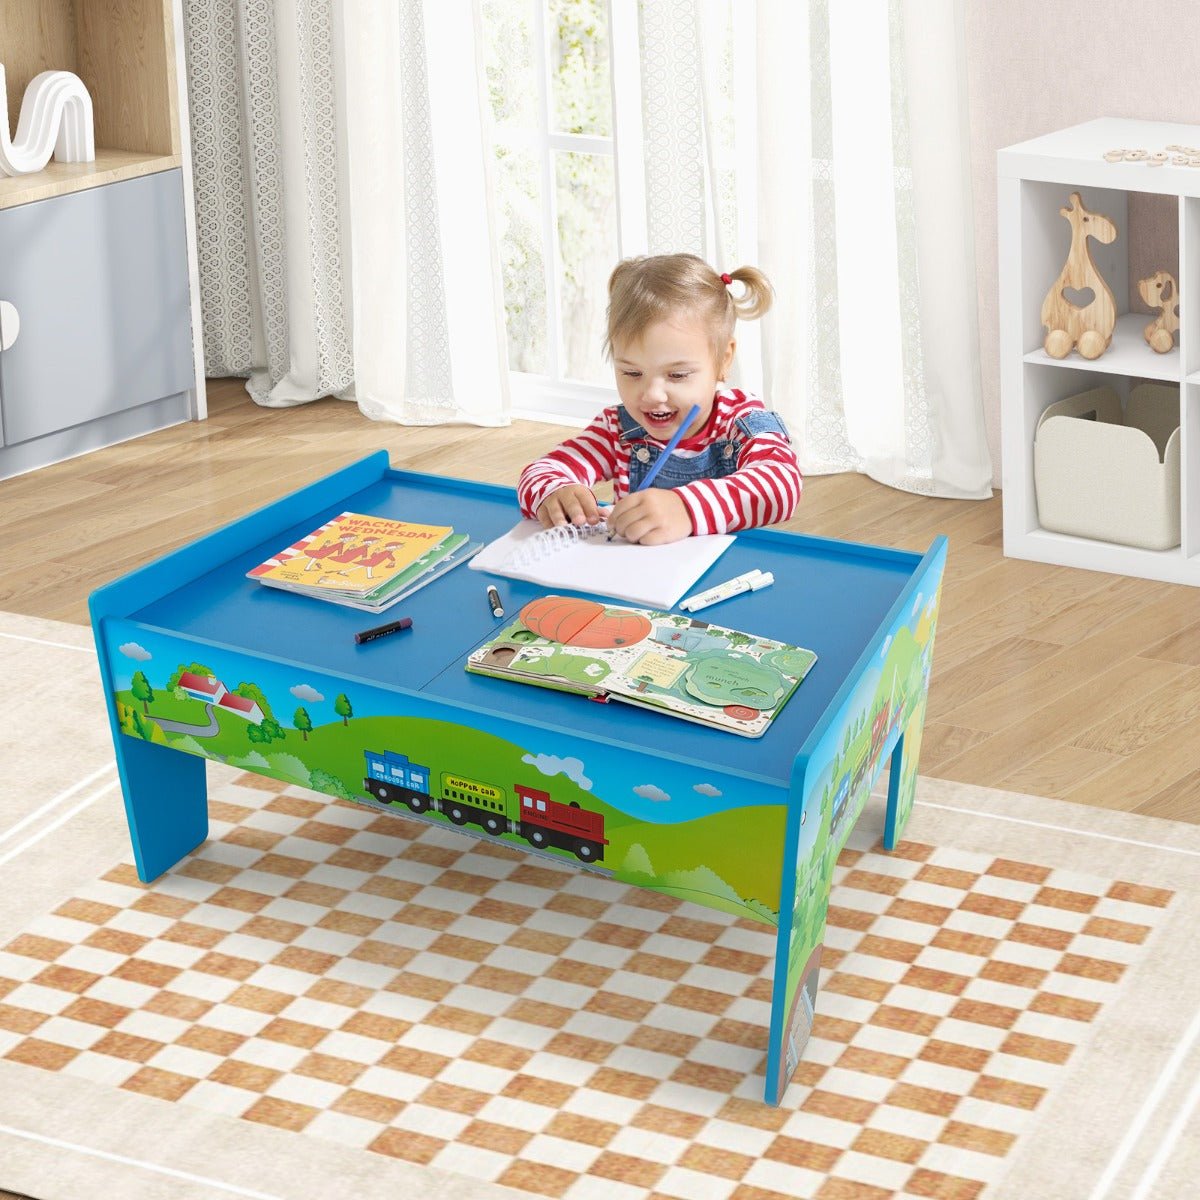 Blue Wooden Table Featuring an 80-Piece Train Set